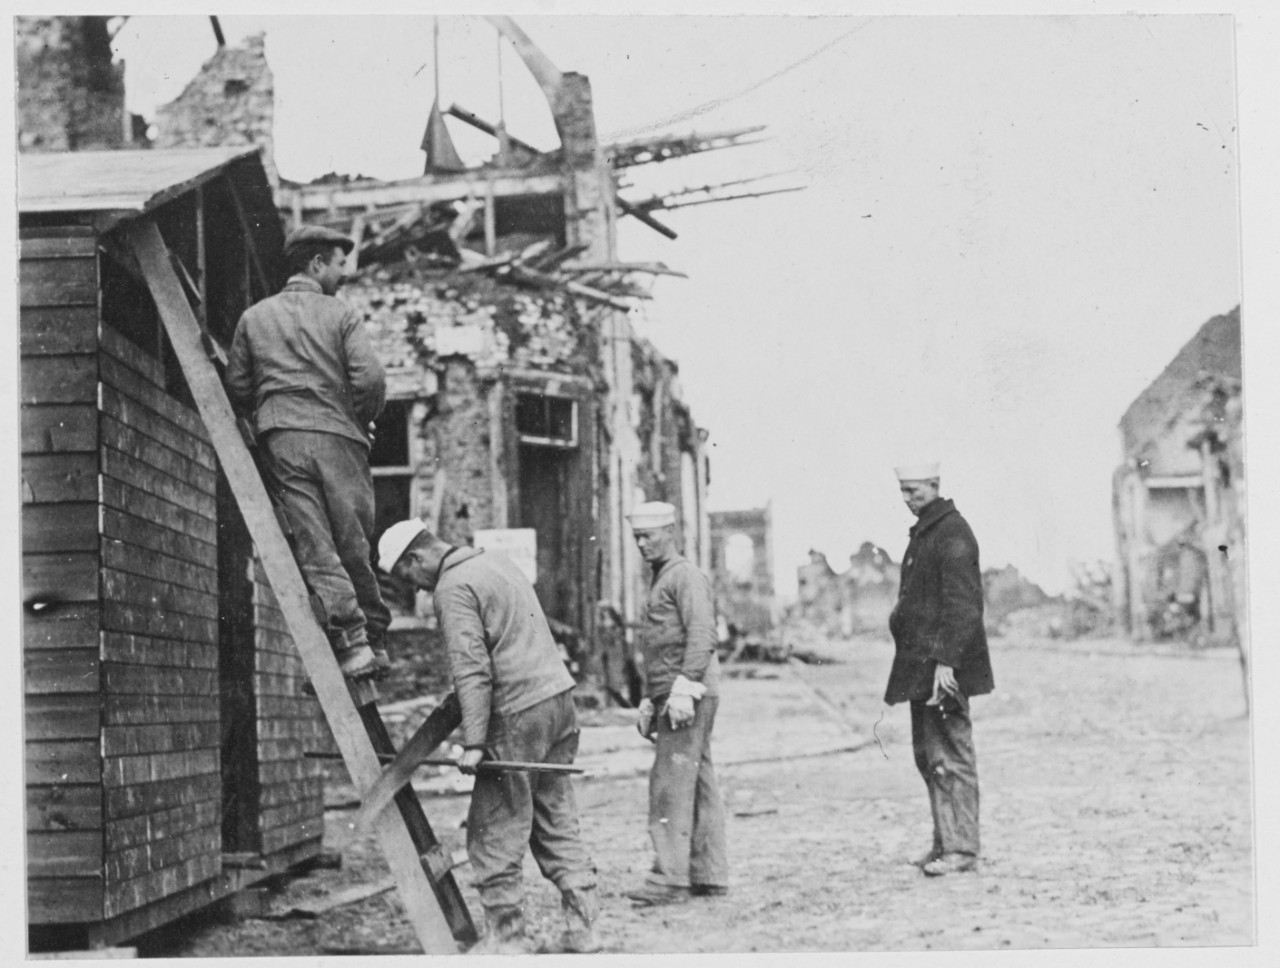 Navy relief work near Lille, France during World War I. Men building, damaged buildings in the background